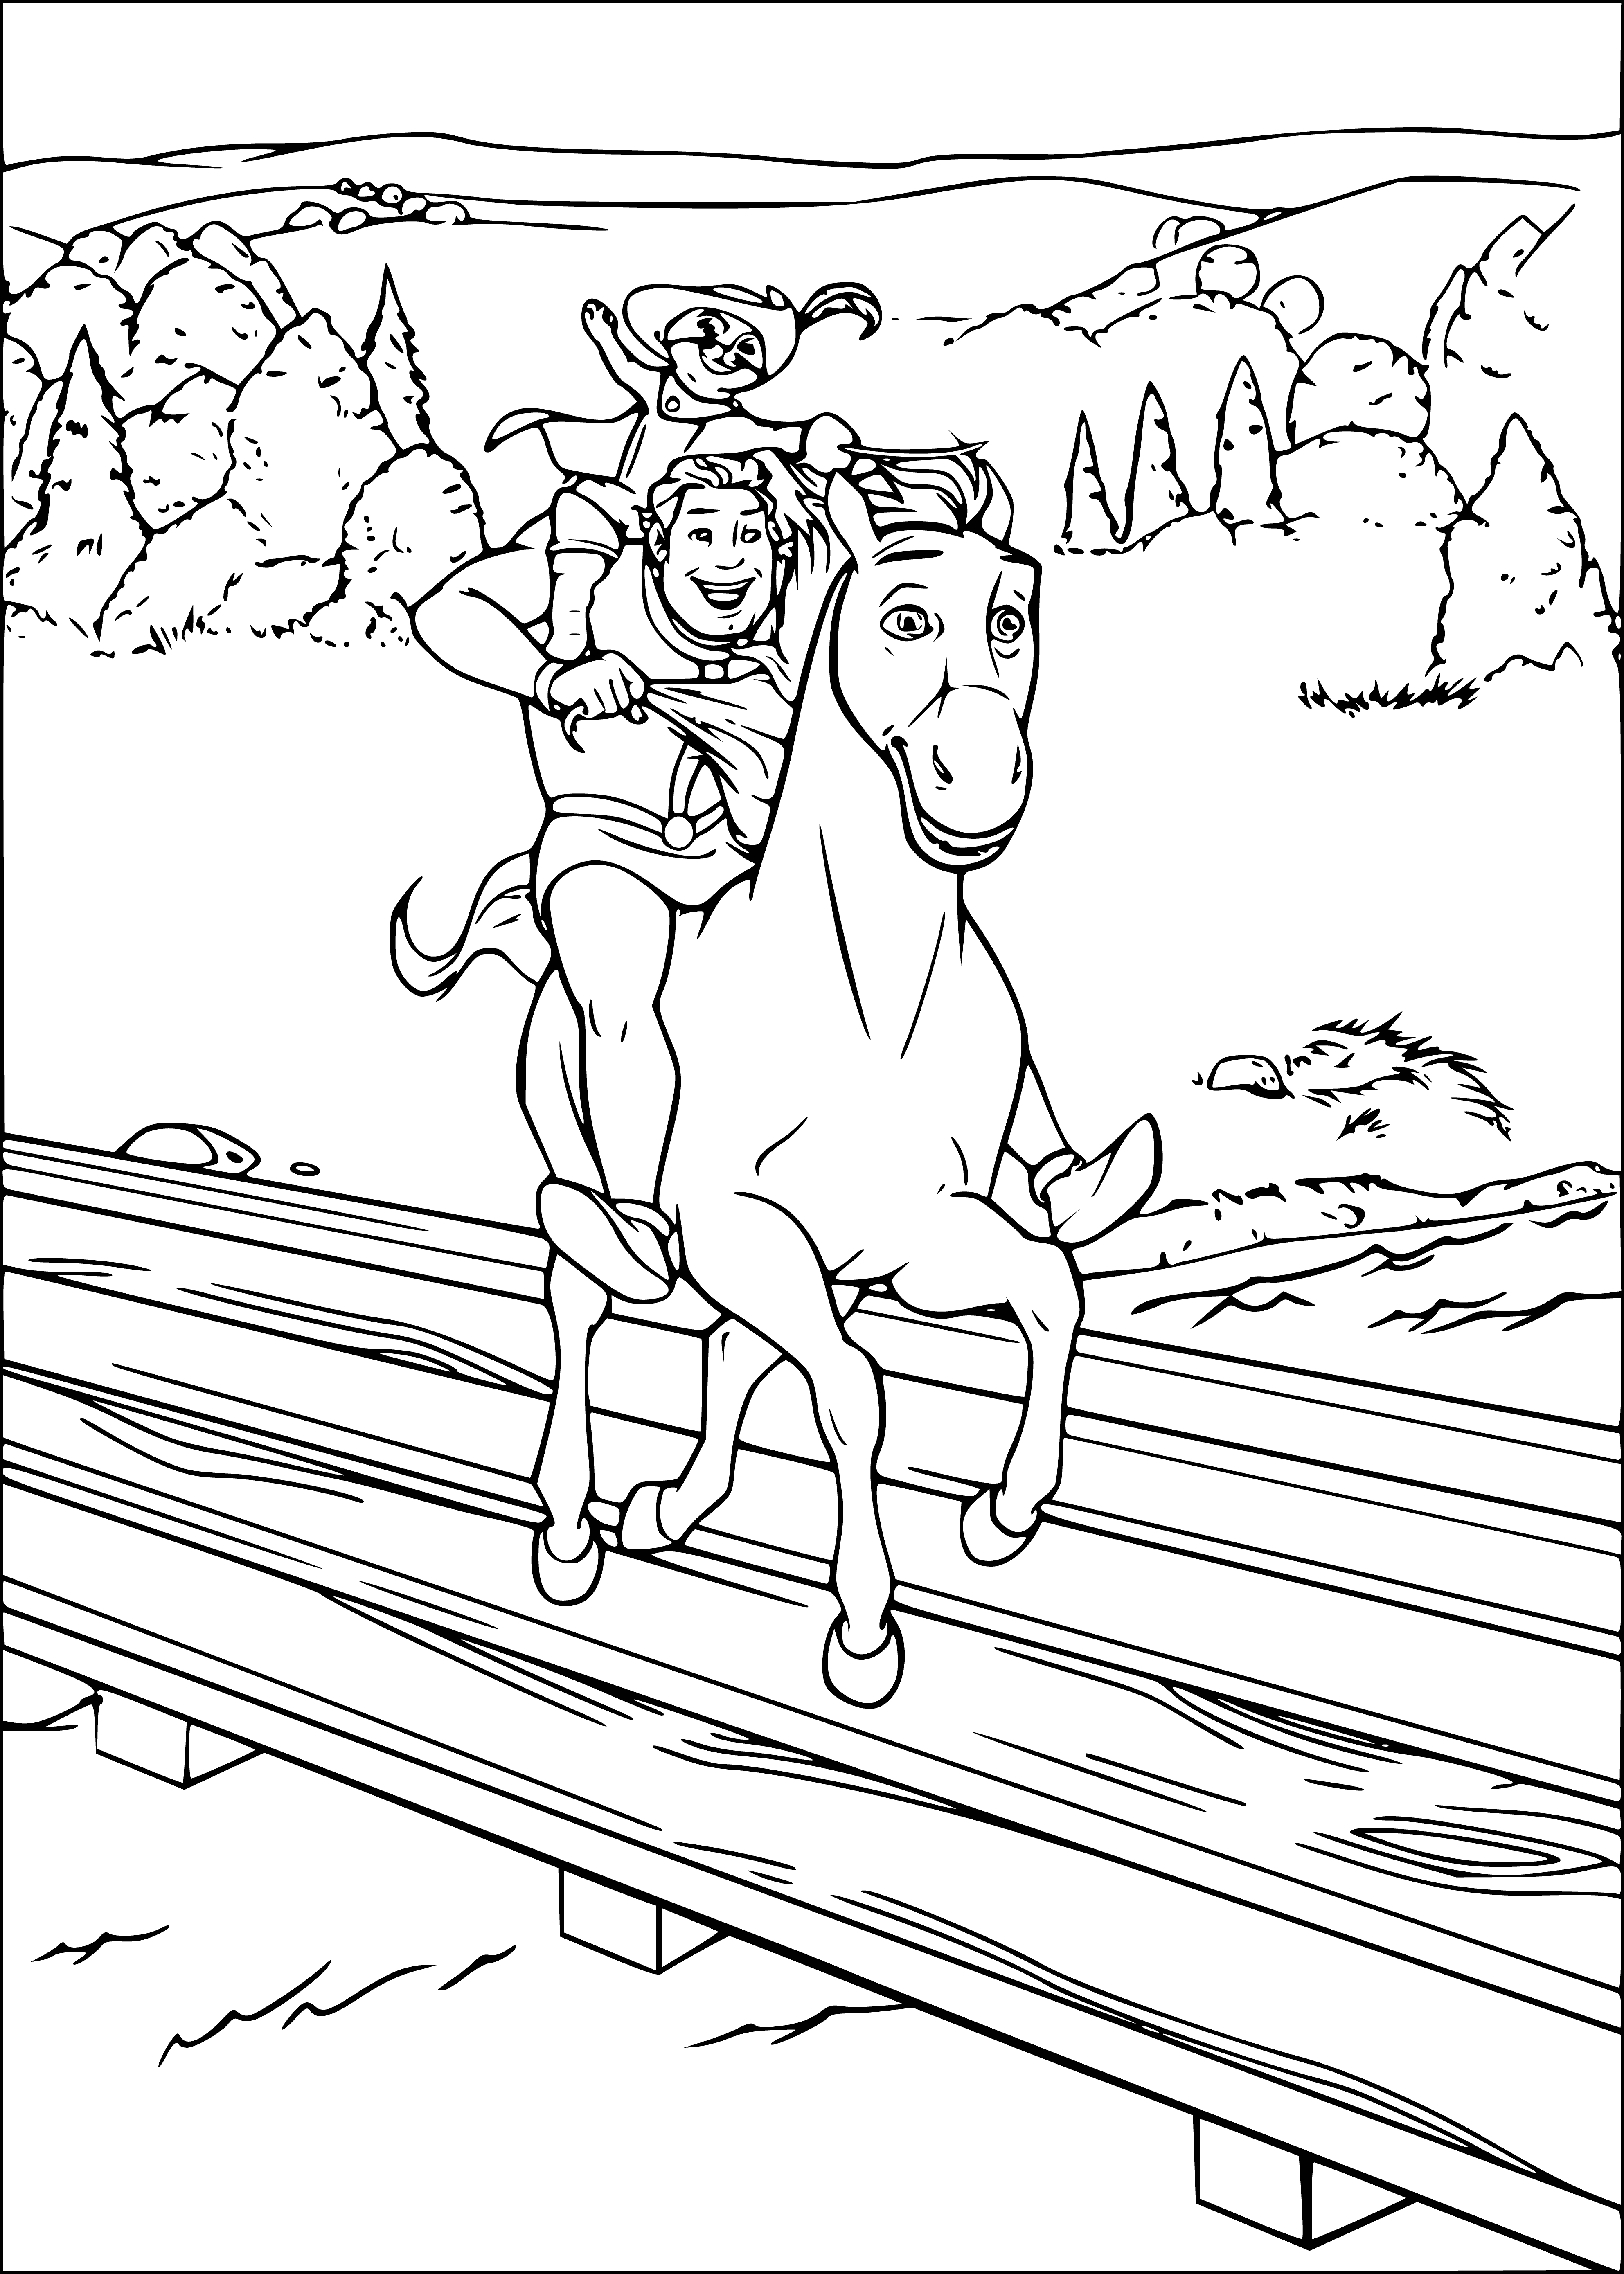 Cat and Shrek on a donkey coloring page